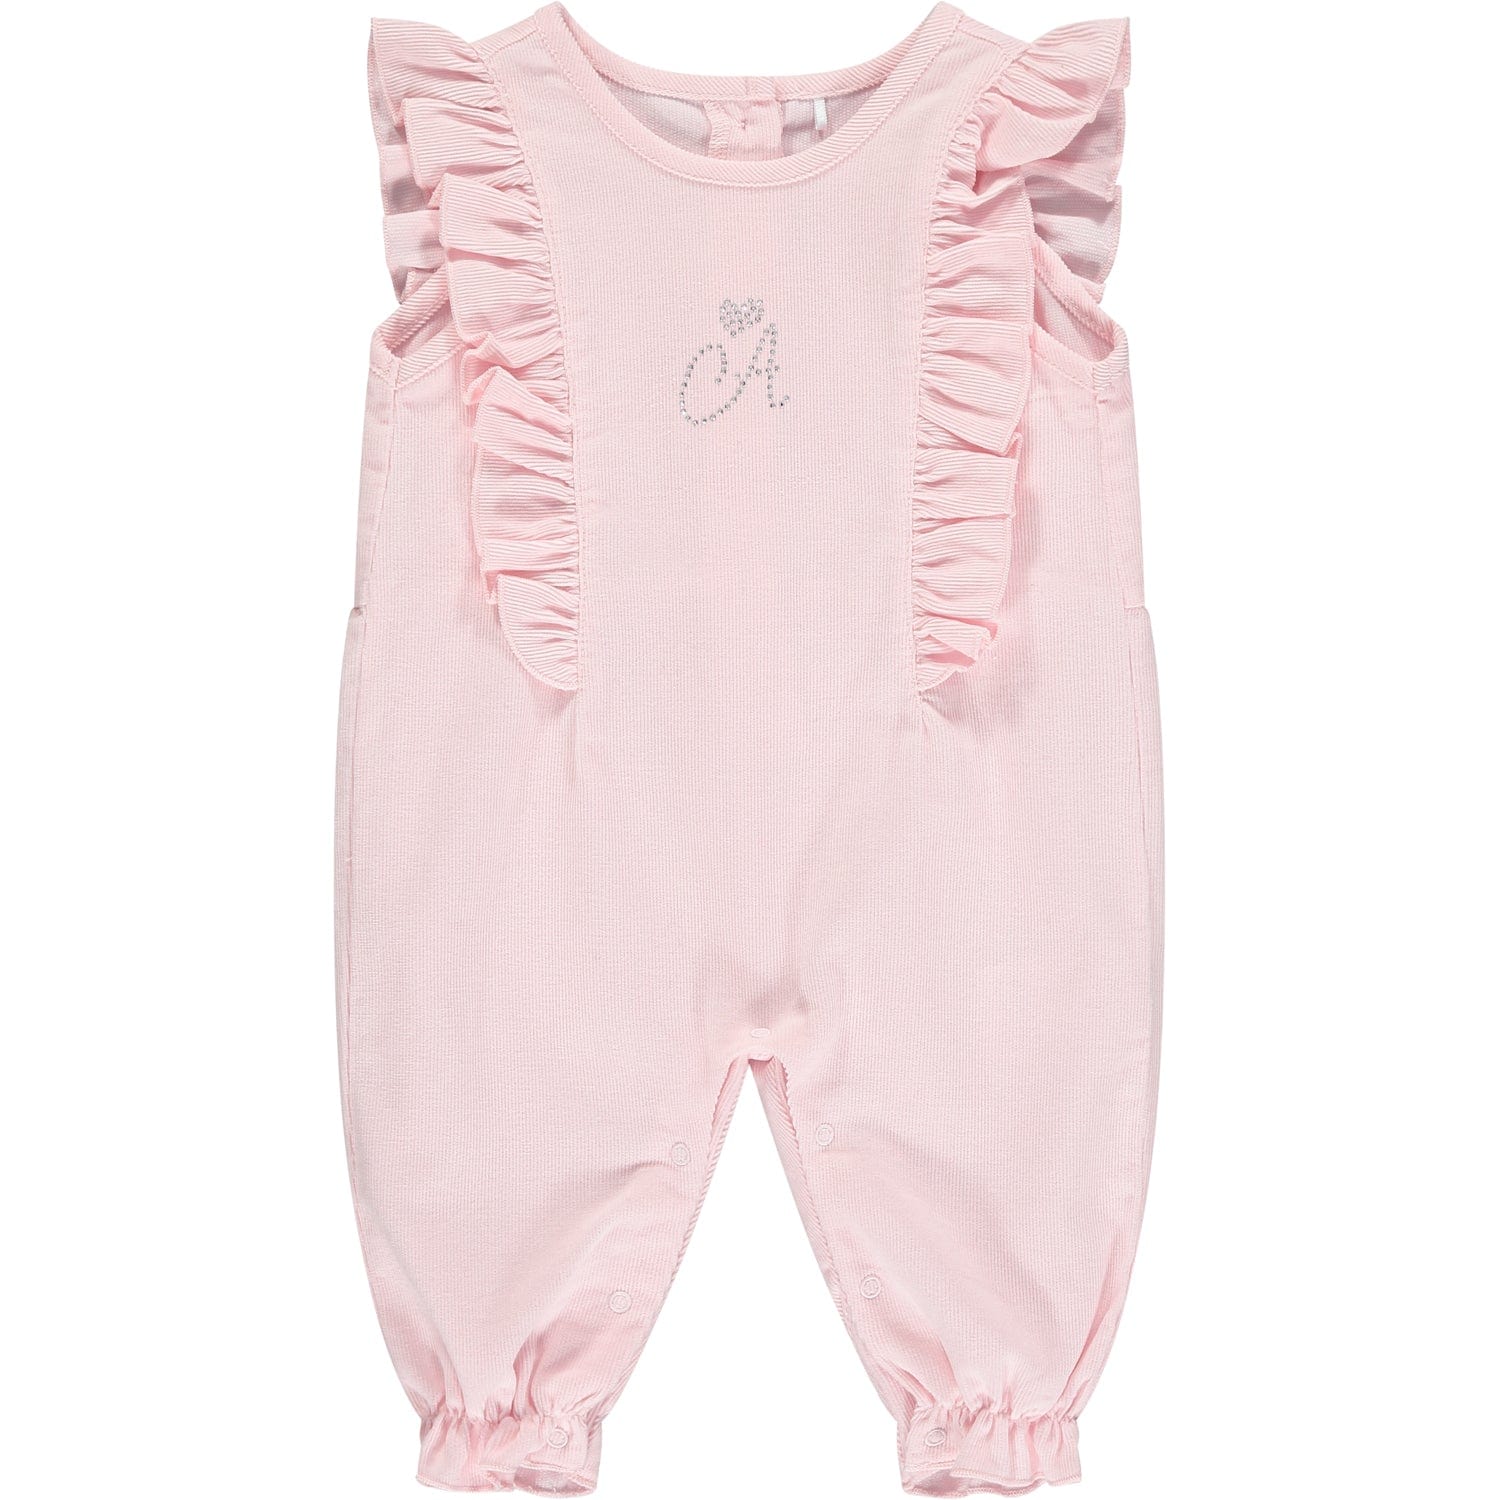 LITTLE A - Elizabeth Baby Cord Dungaree Set - Baby Pink